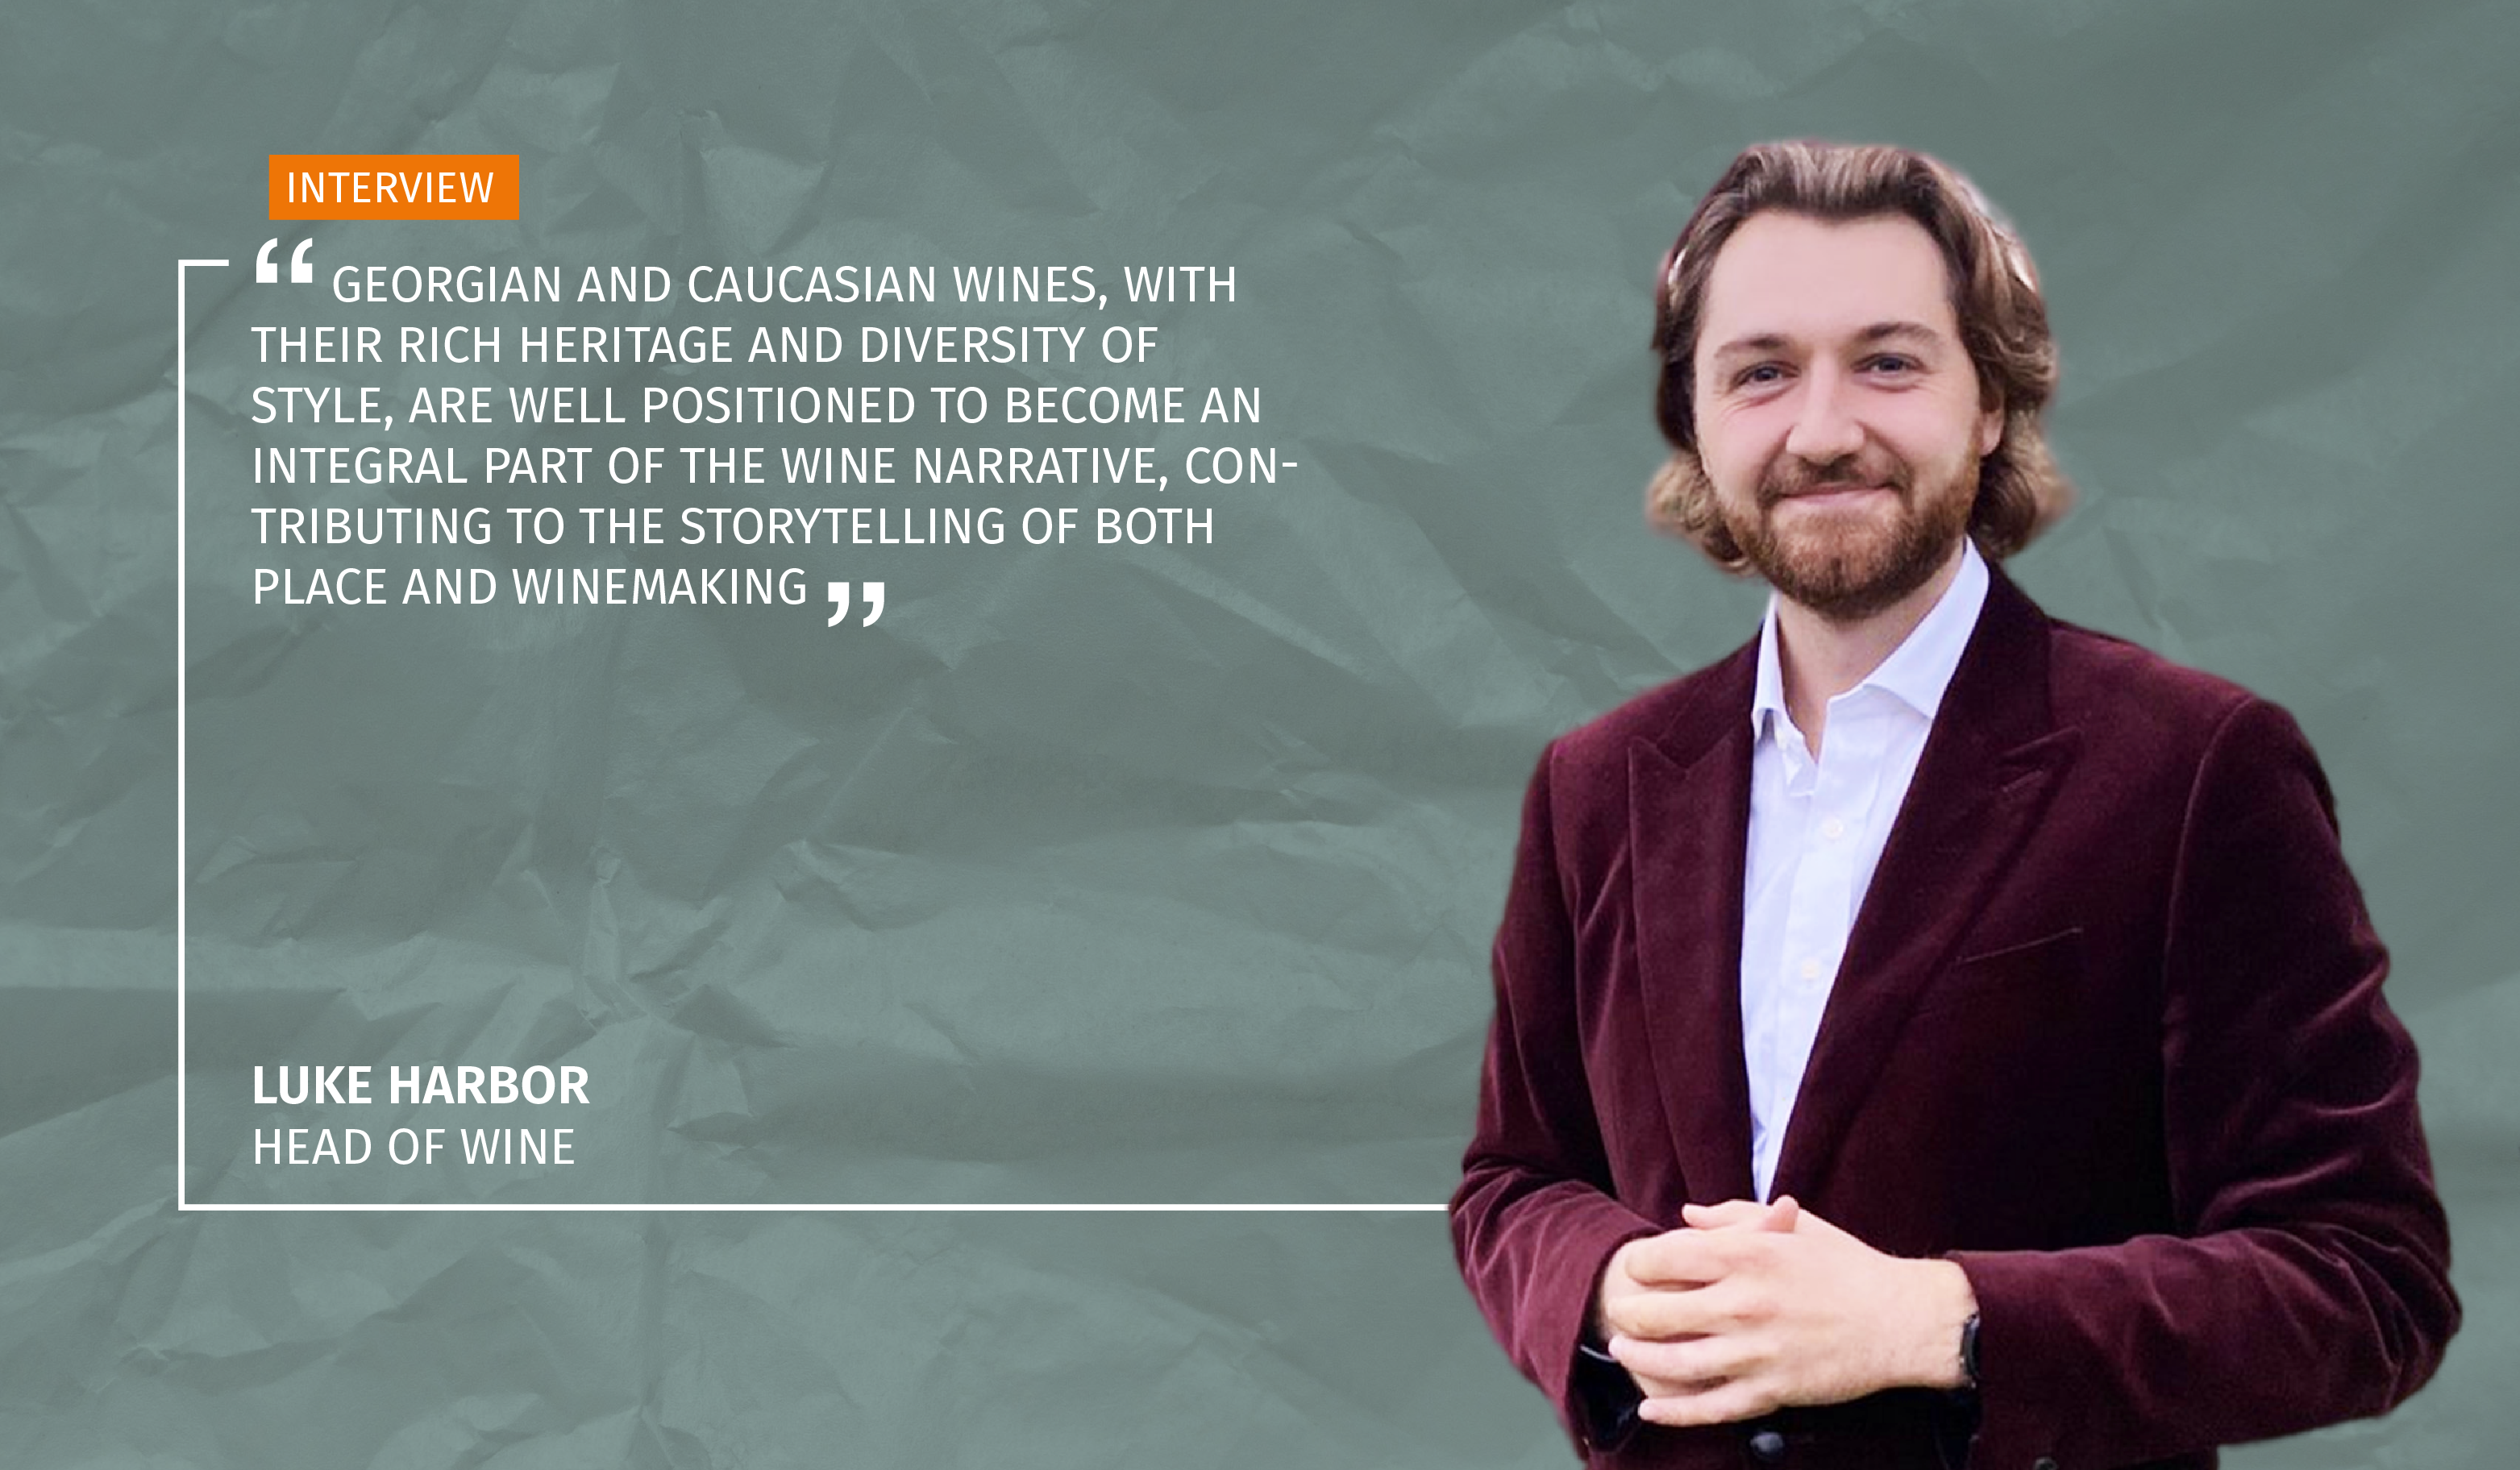 Luke Harbor: Georgian and Caucasian wines, with their rich heritage and diversity of style, are well positioned to become an integral part of the wine narrative, contributing to the storytelling of both place and winemaking